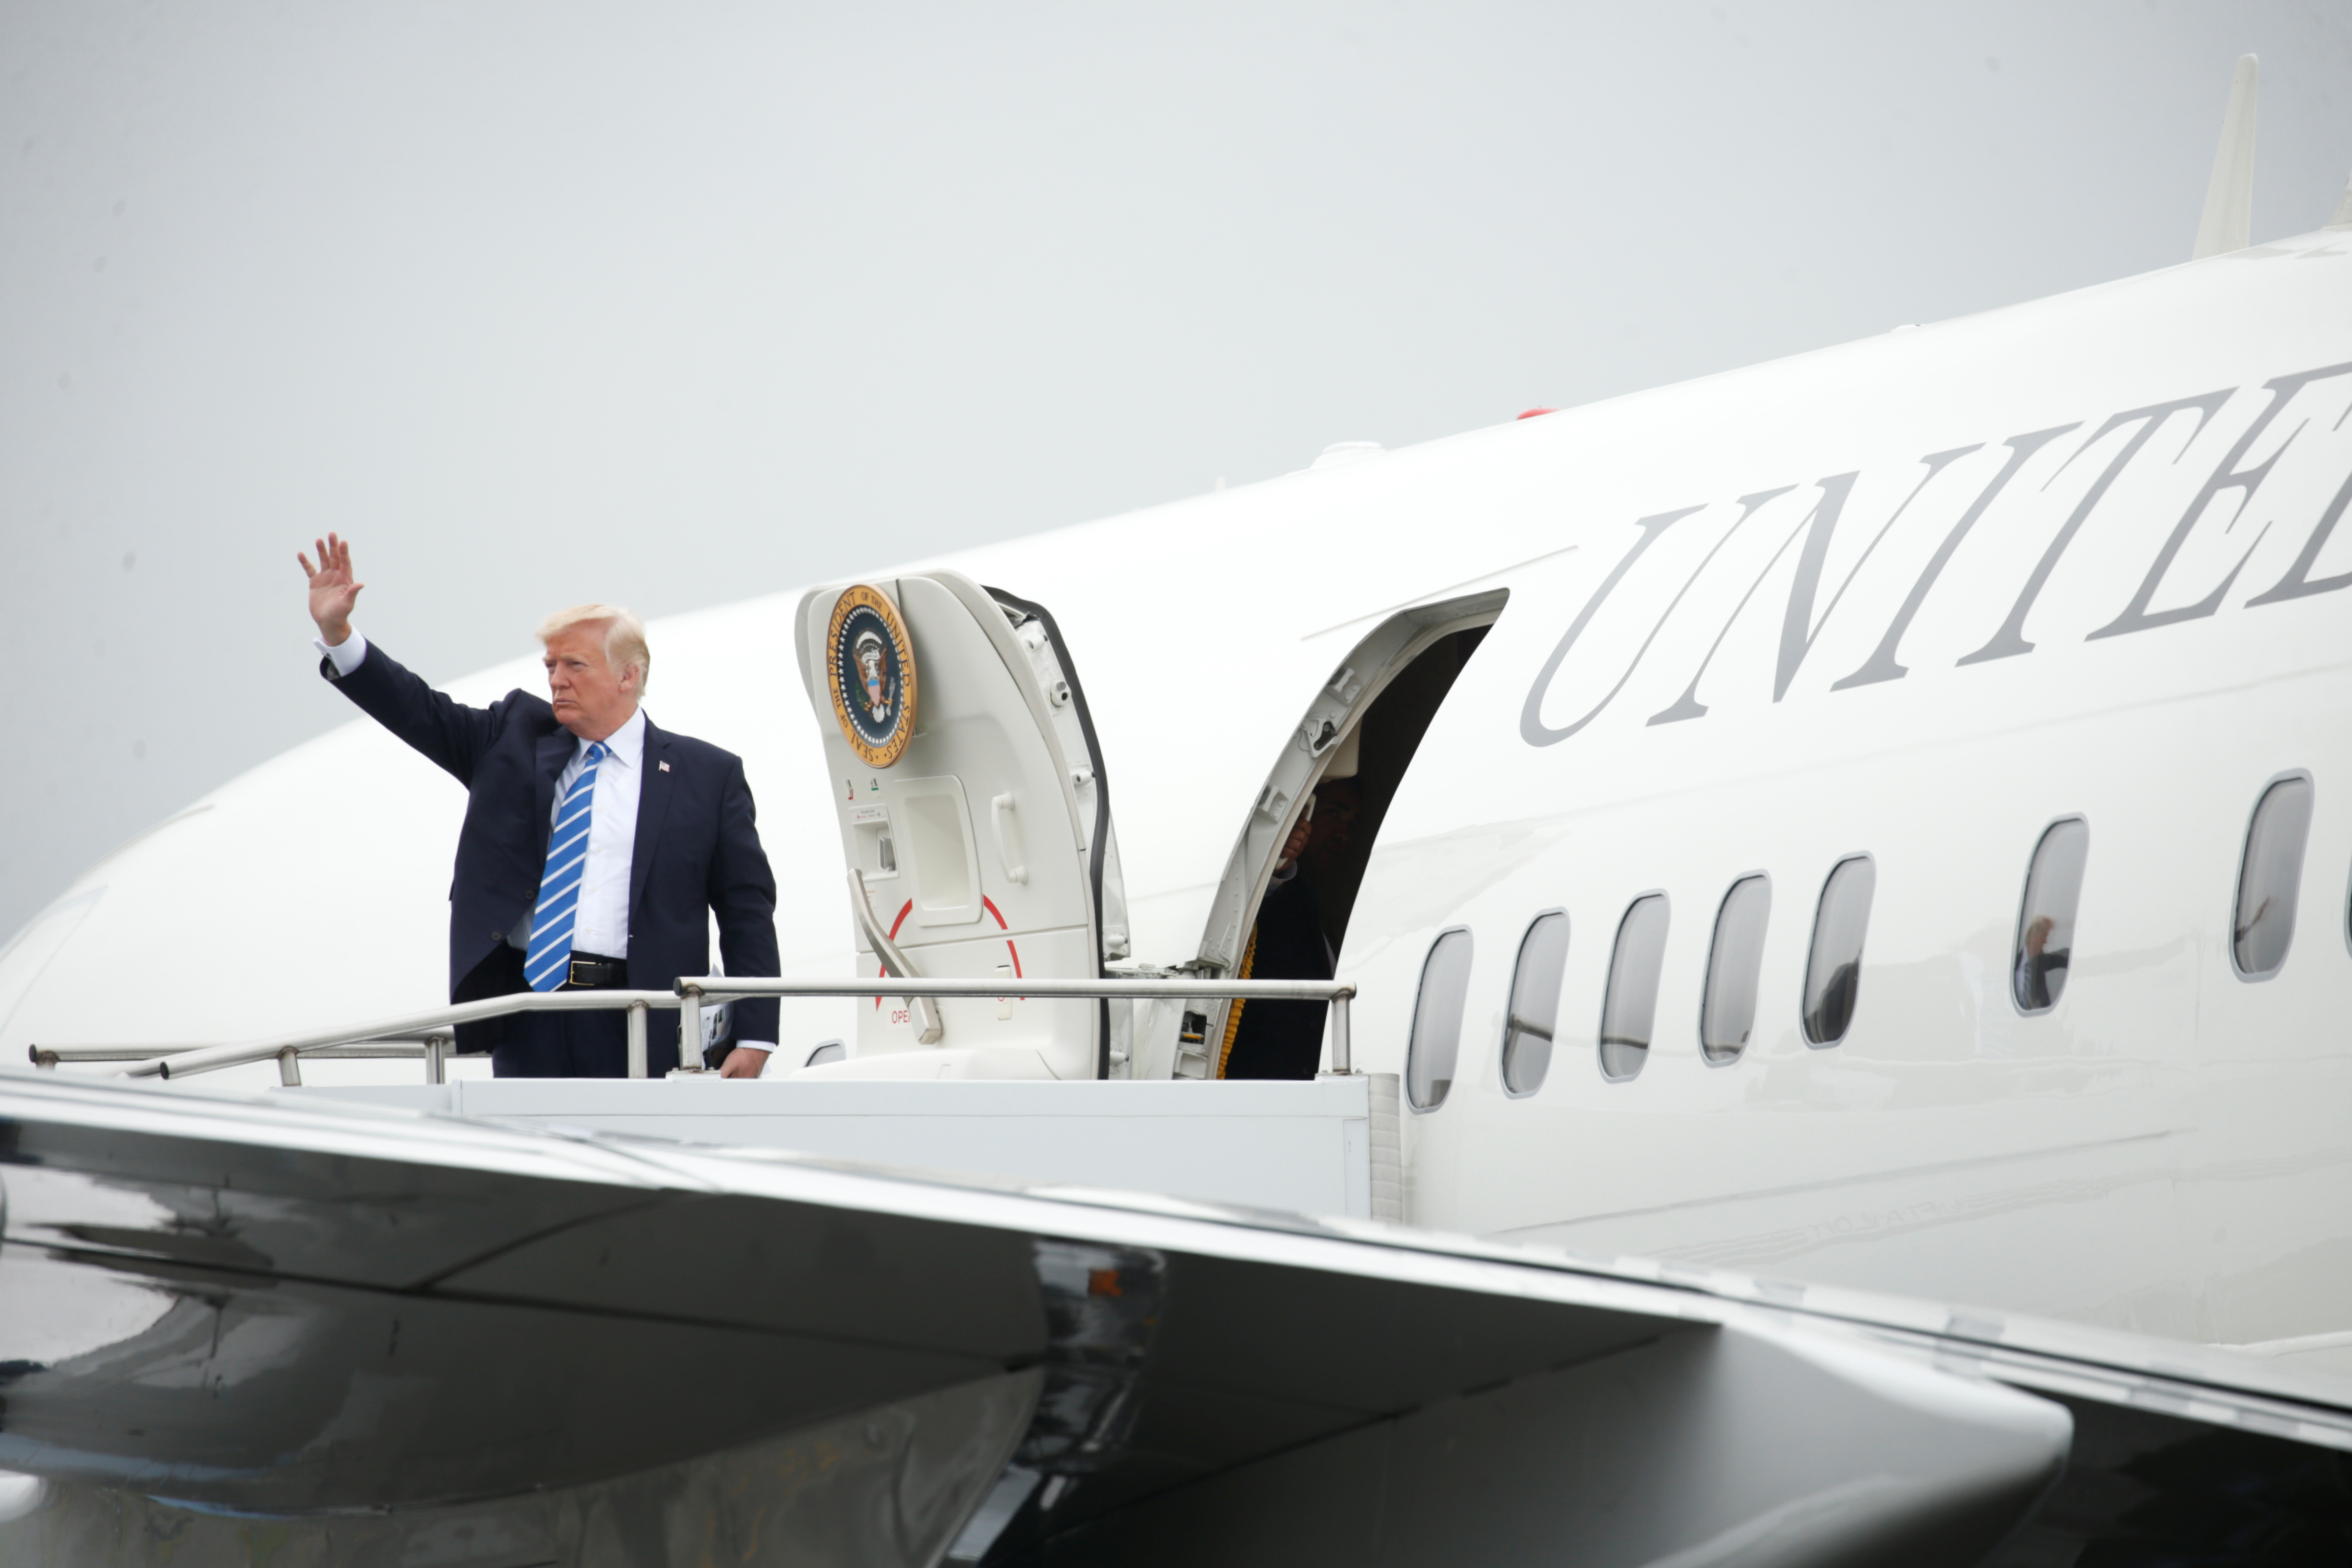 President Trump boards Air Force One.